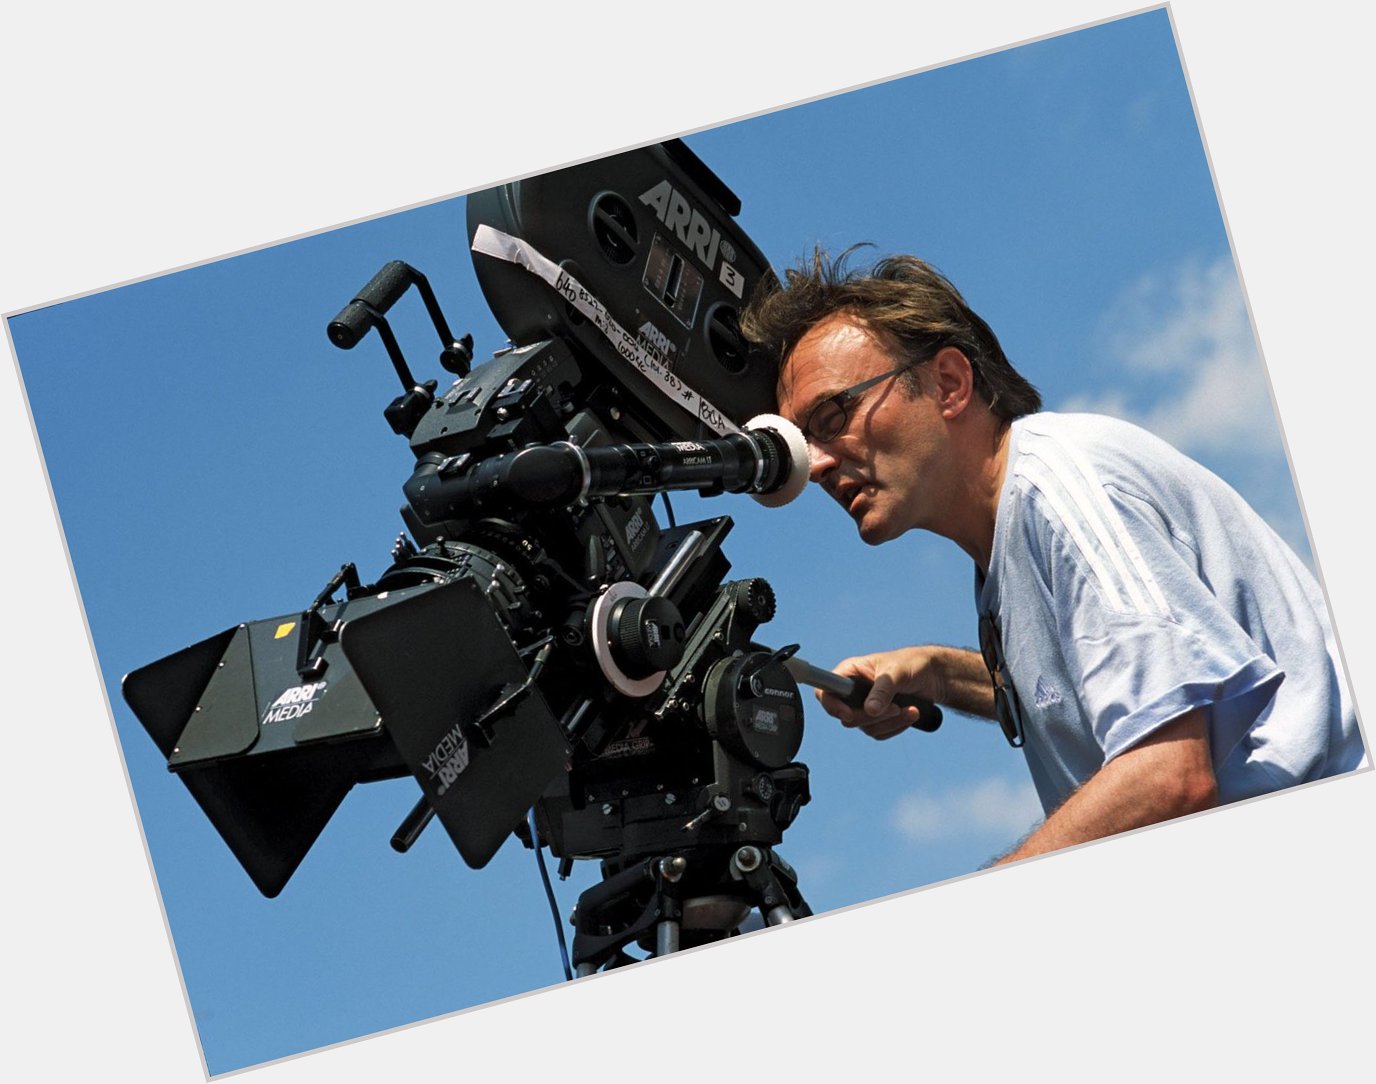 Happy Birthday to the living legend himself, Danny Boyle. What is your all-time favourite of his films? 